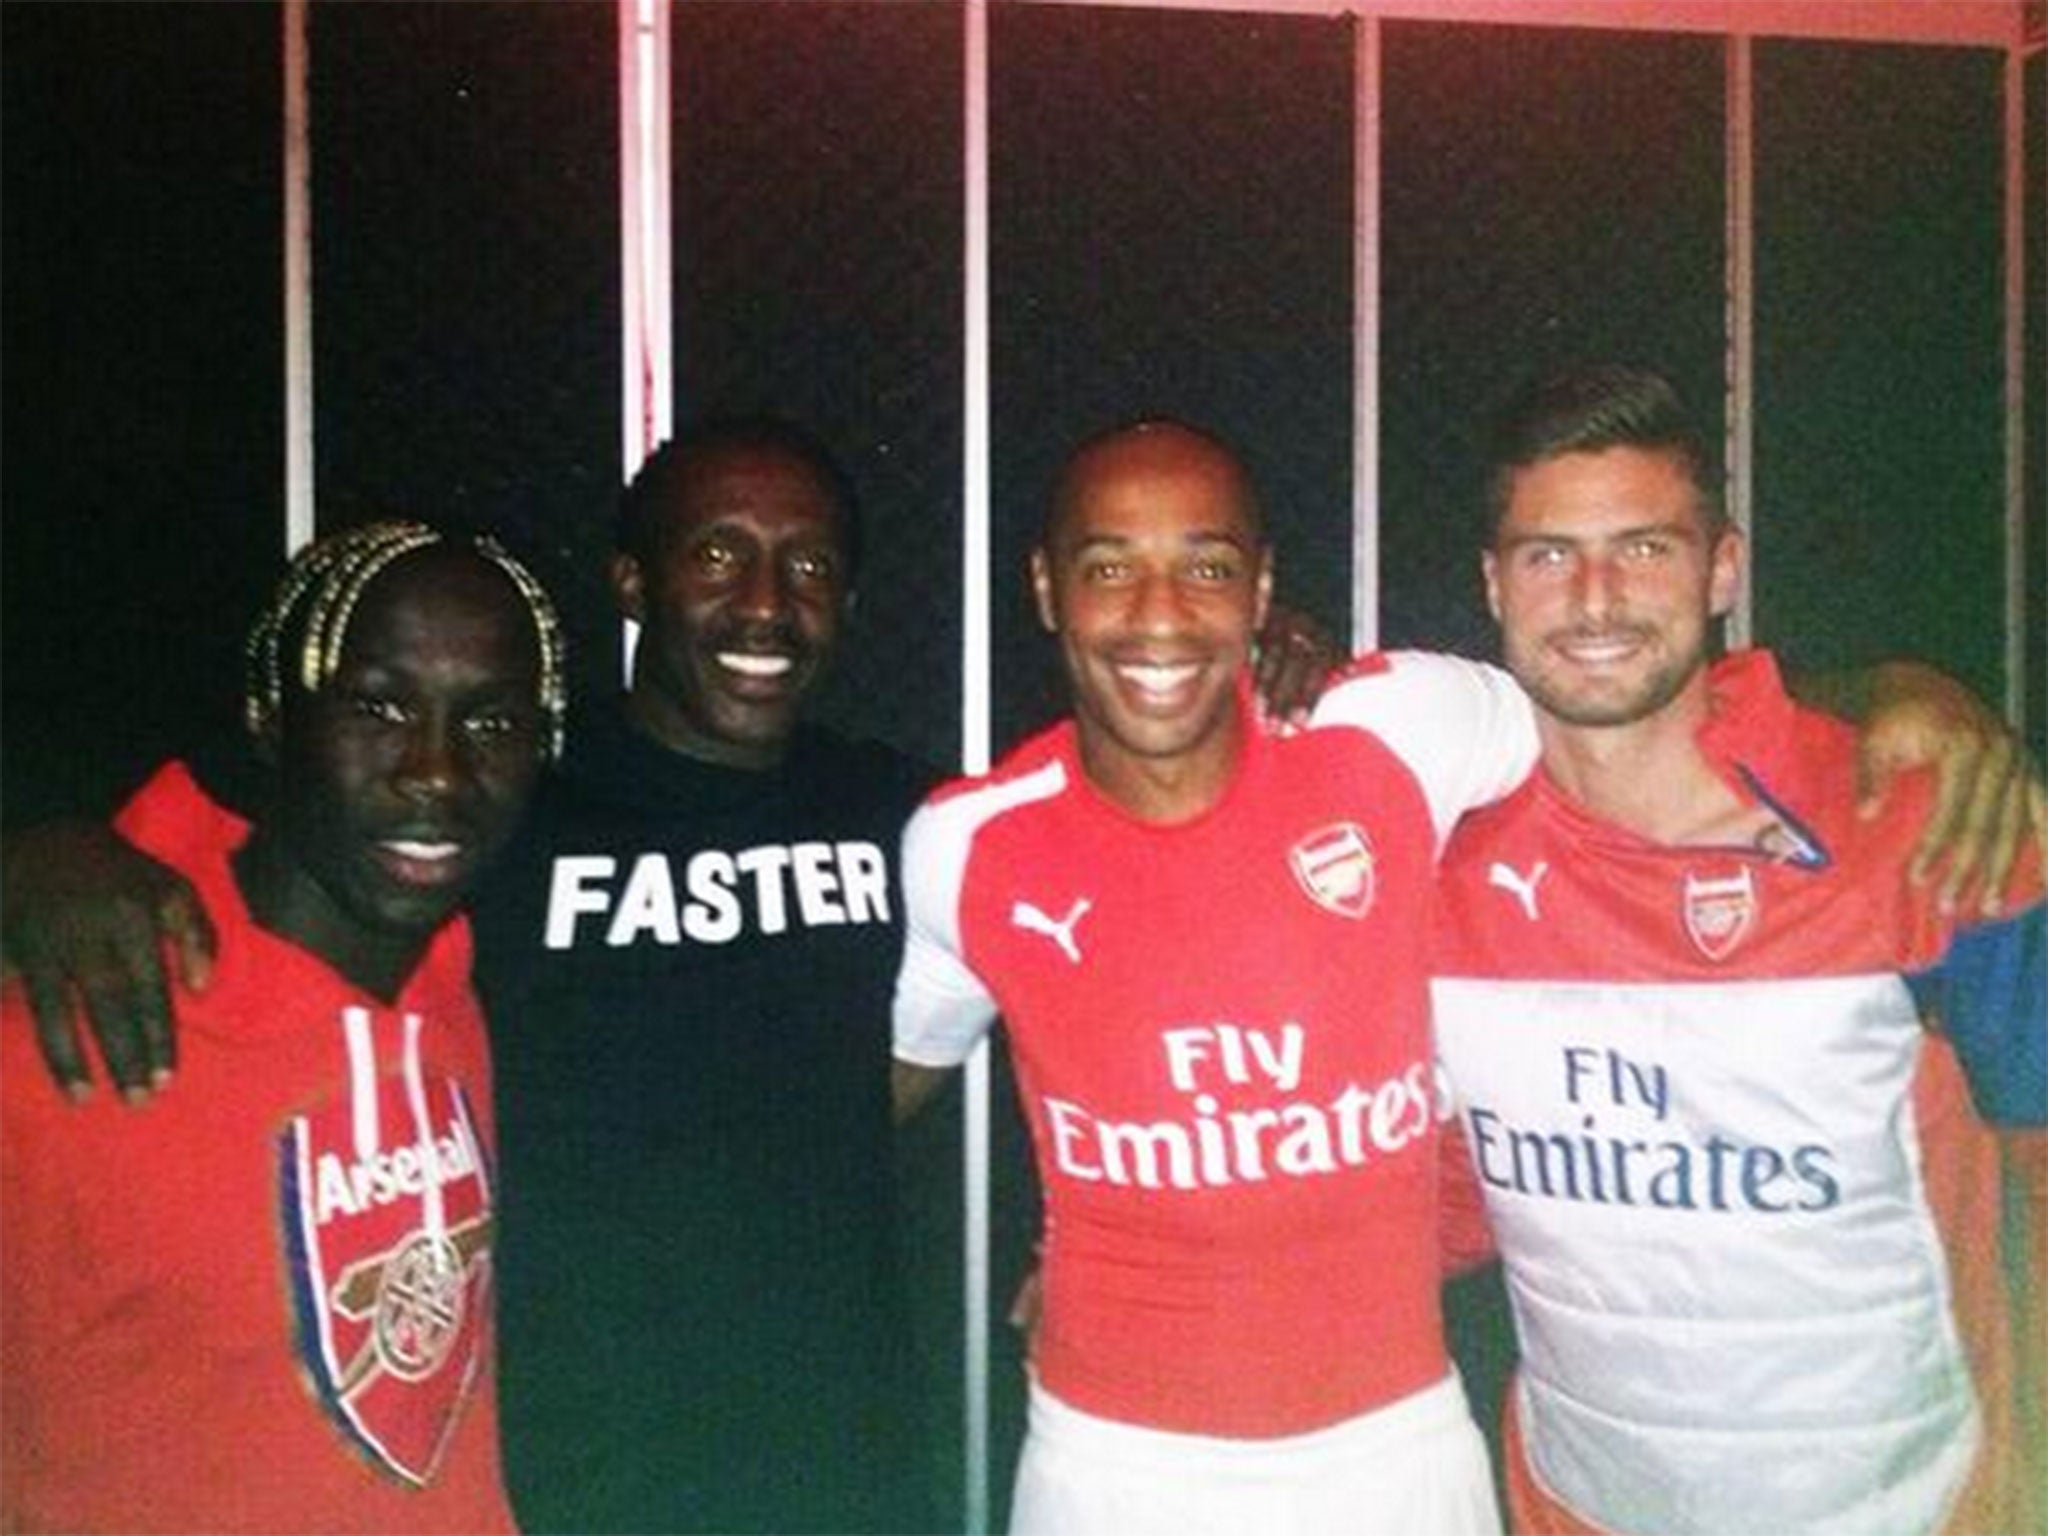 Linford Christie mistakenly leaked this picture in October - the two kits match